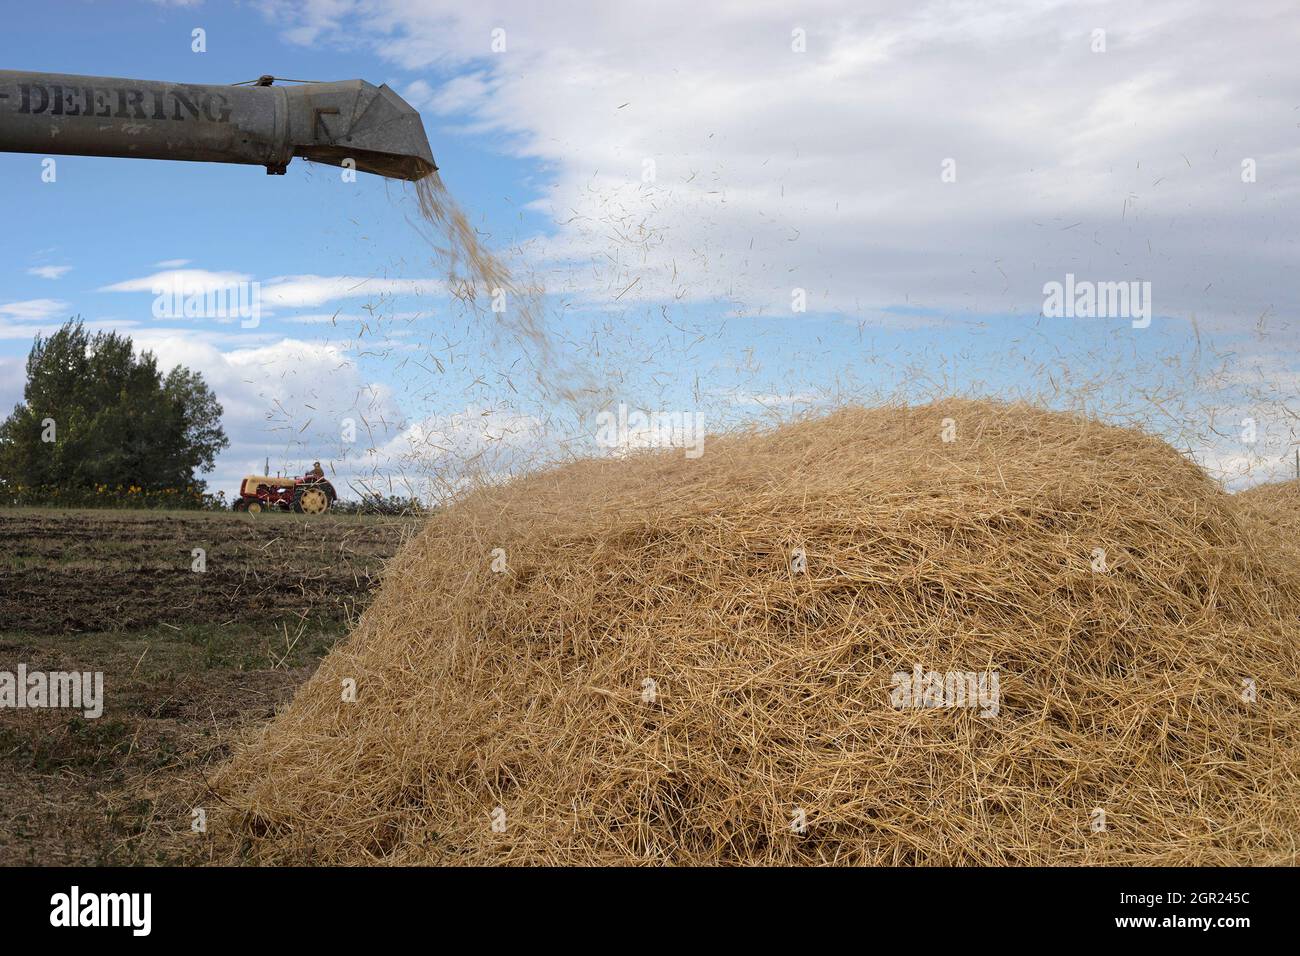 Barley straw blowing out from an antique McCormick - Deering threshing machine after being mechanically separated from the grains in autumn harvest Stock Photo